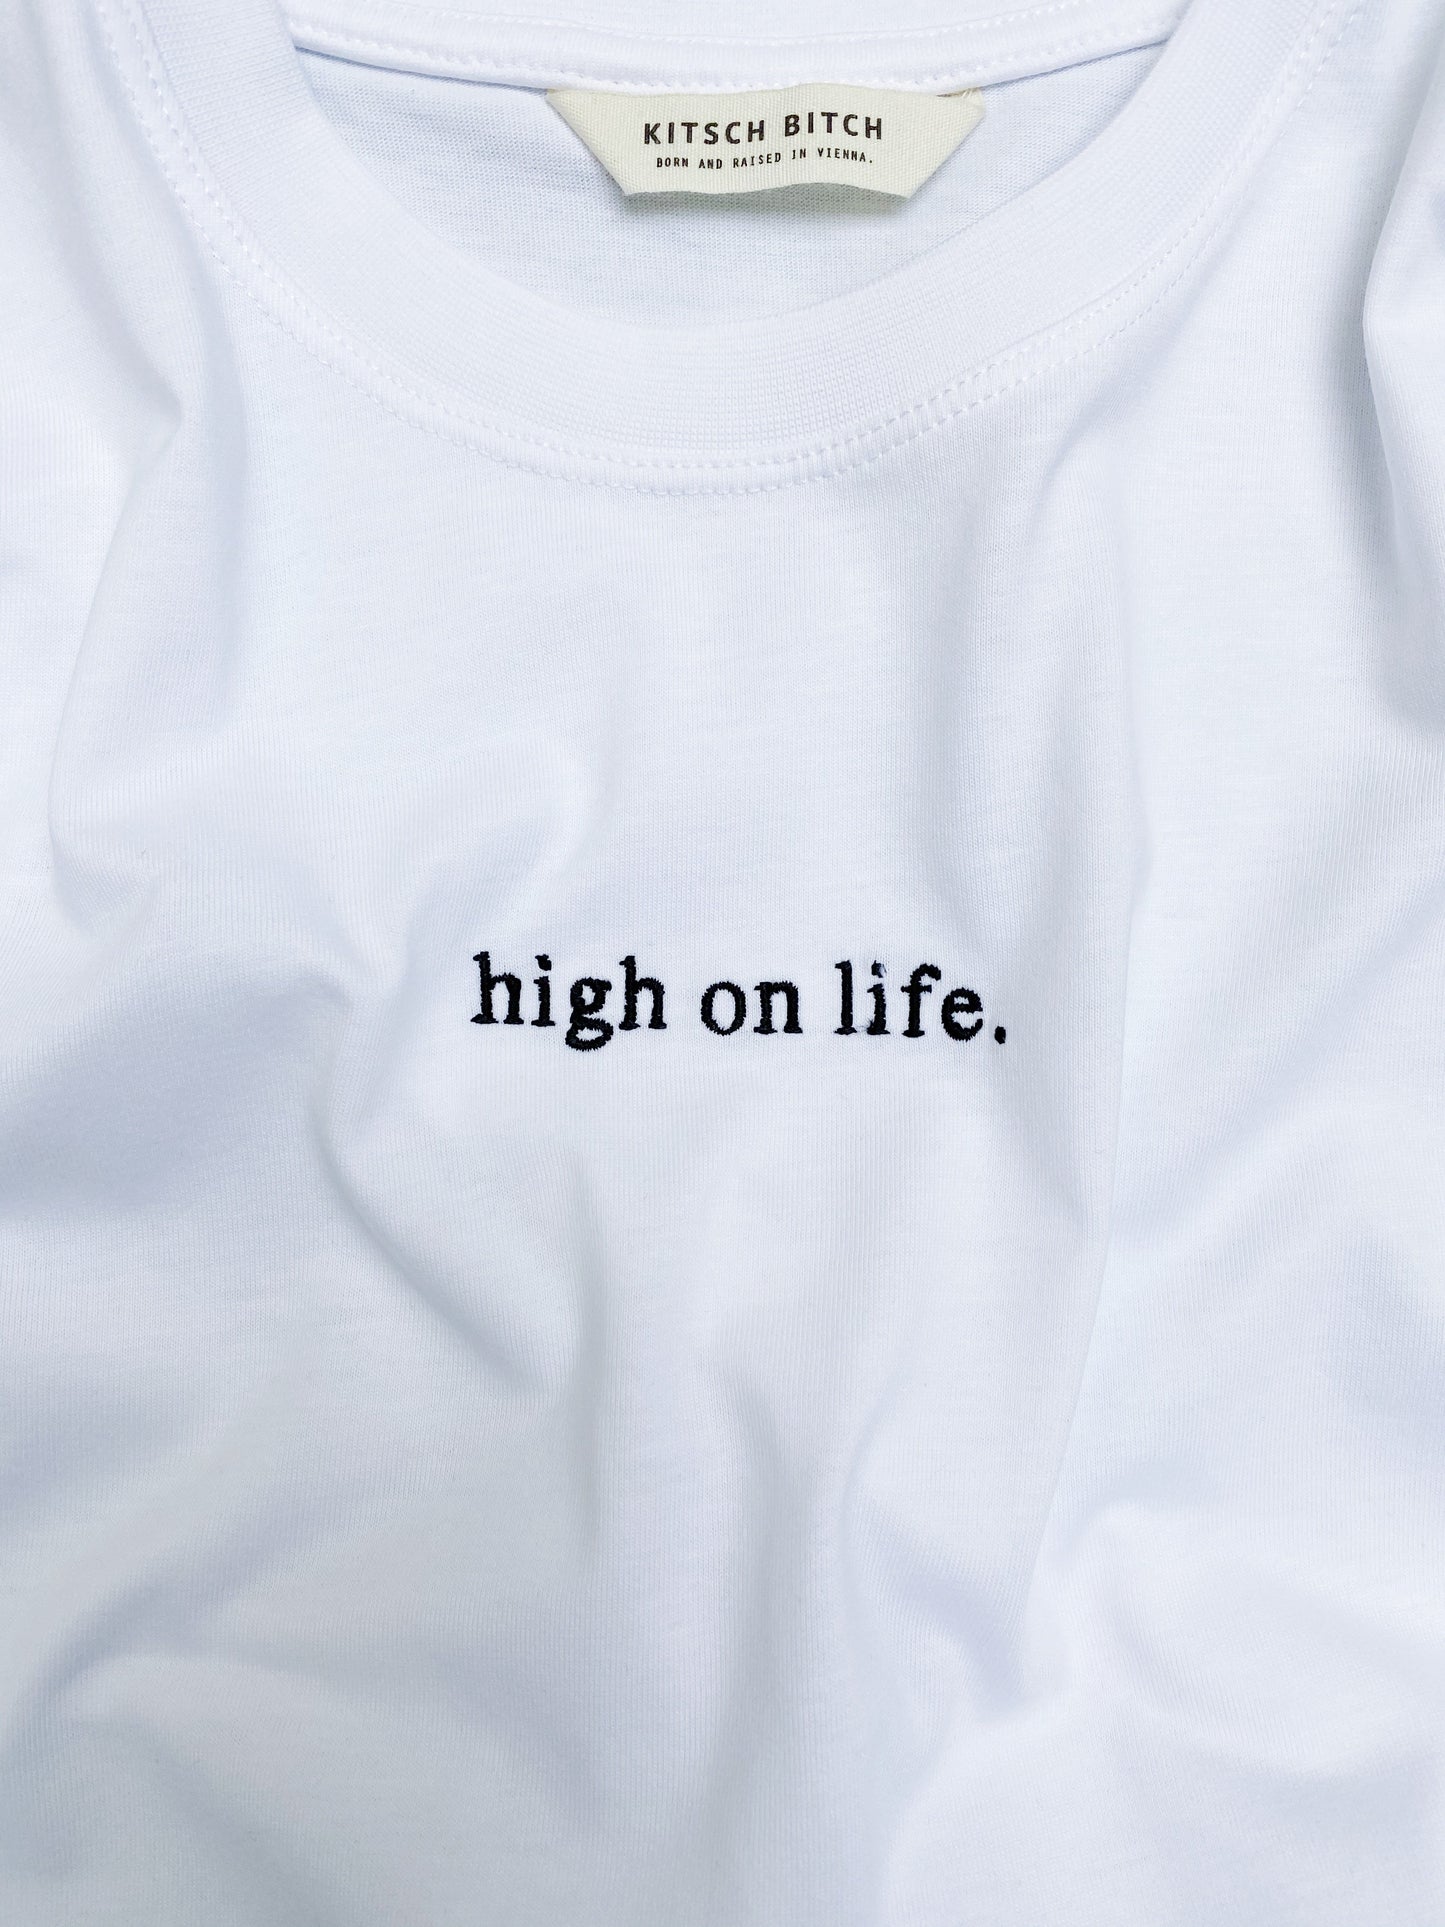 KITSCH BITCH High On Life Embroidery Unisex T-Shirt